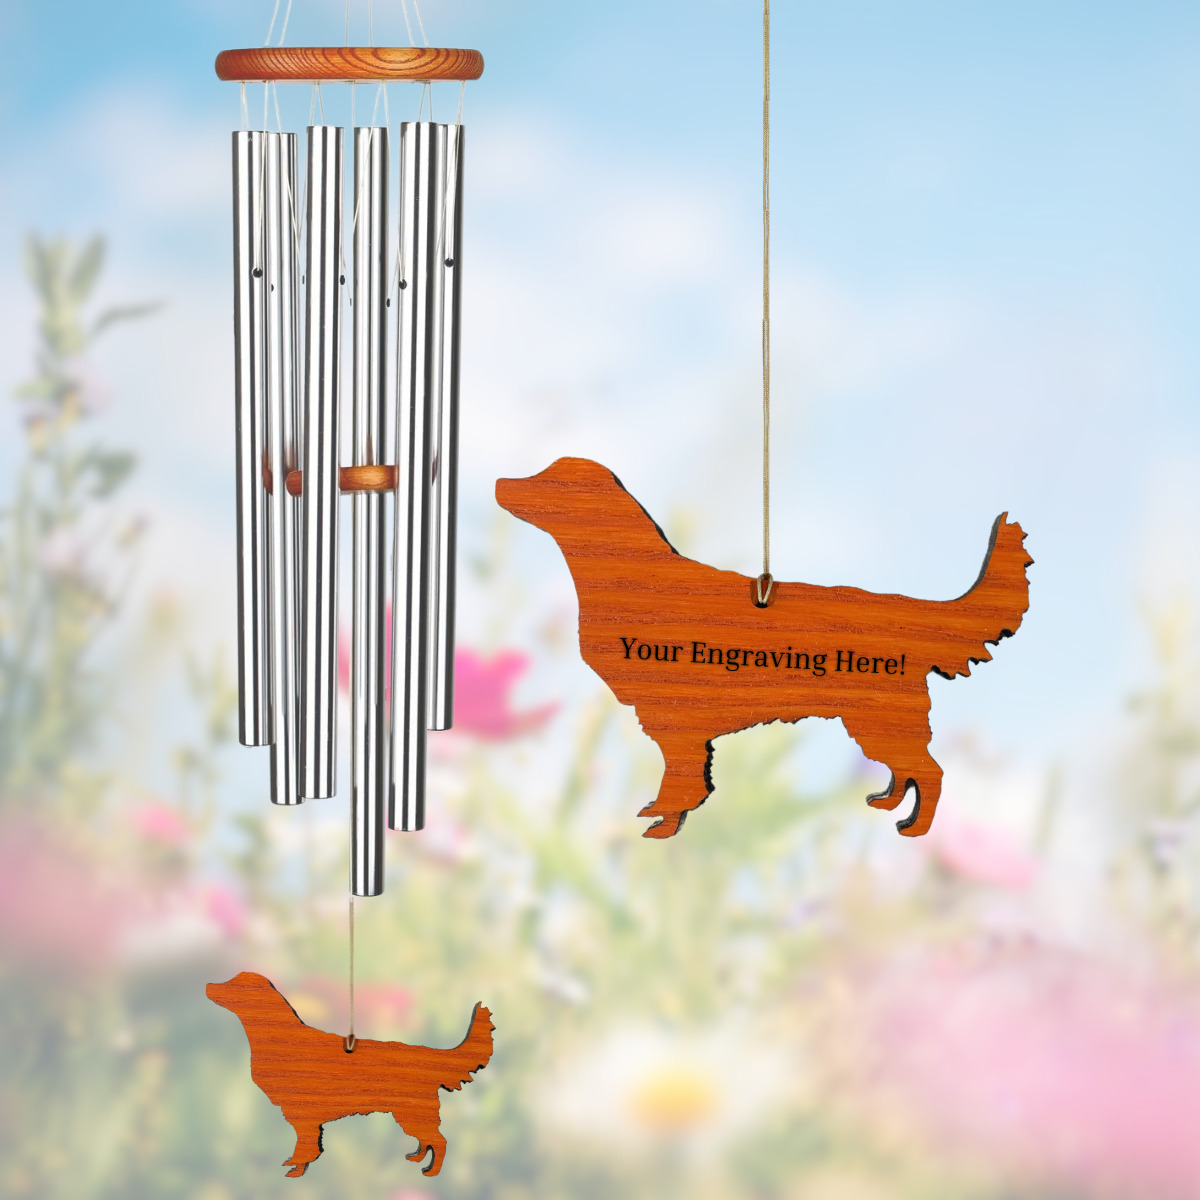 Amazing Grace Silver 40 Inch Wind Chime - Engravable Dog Sail